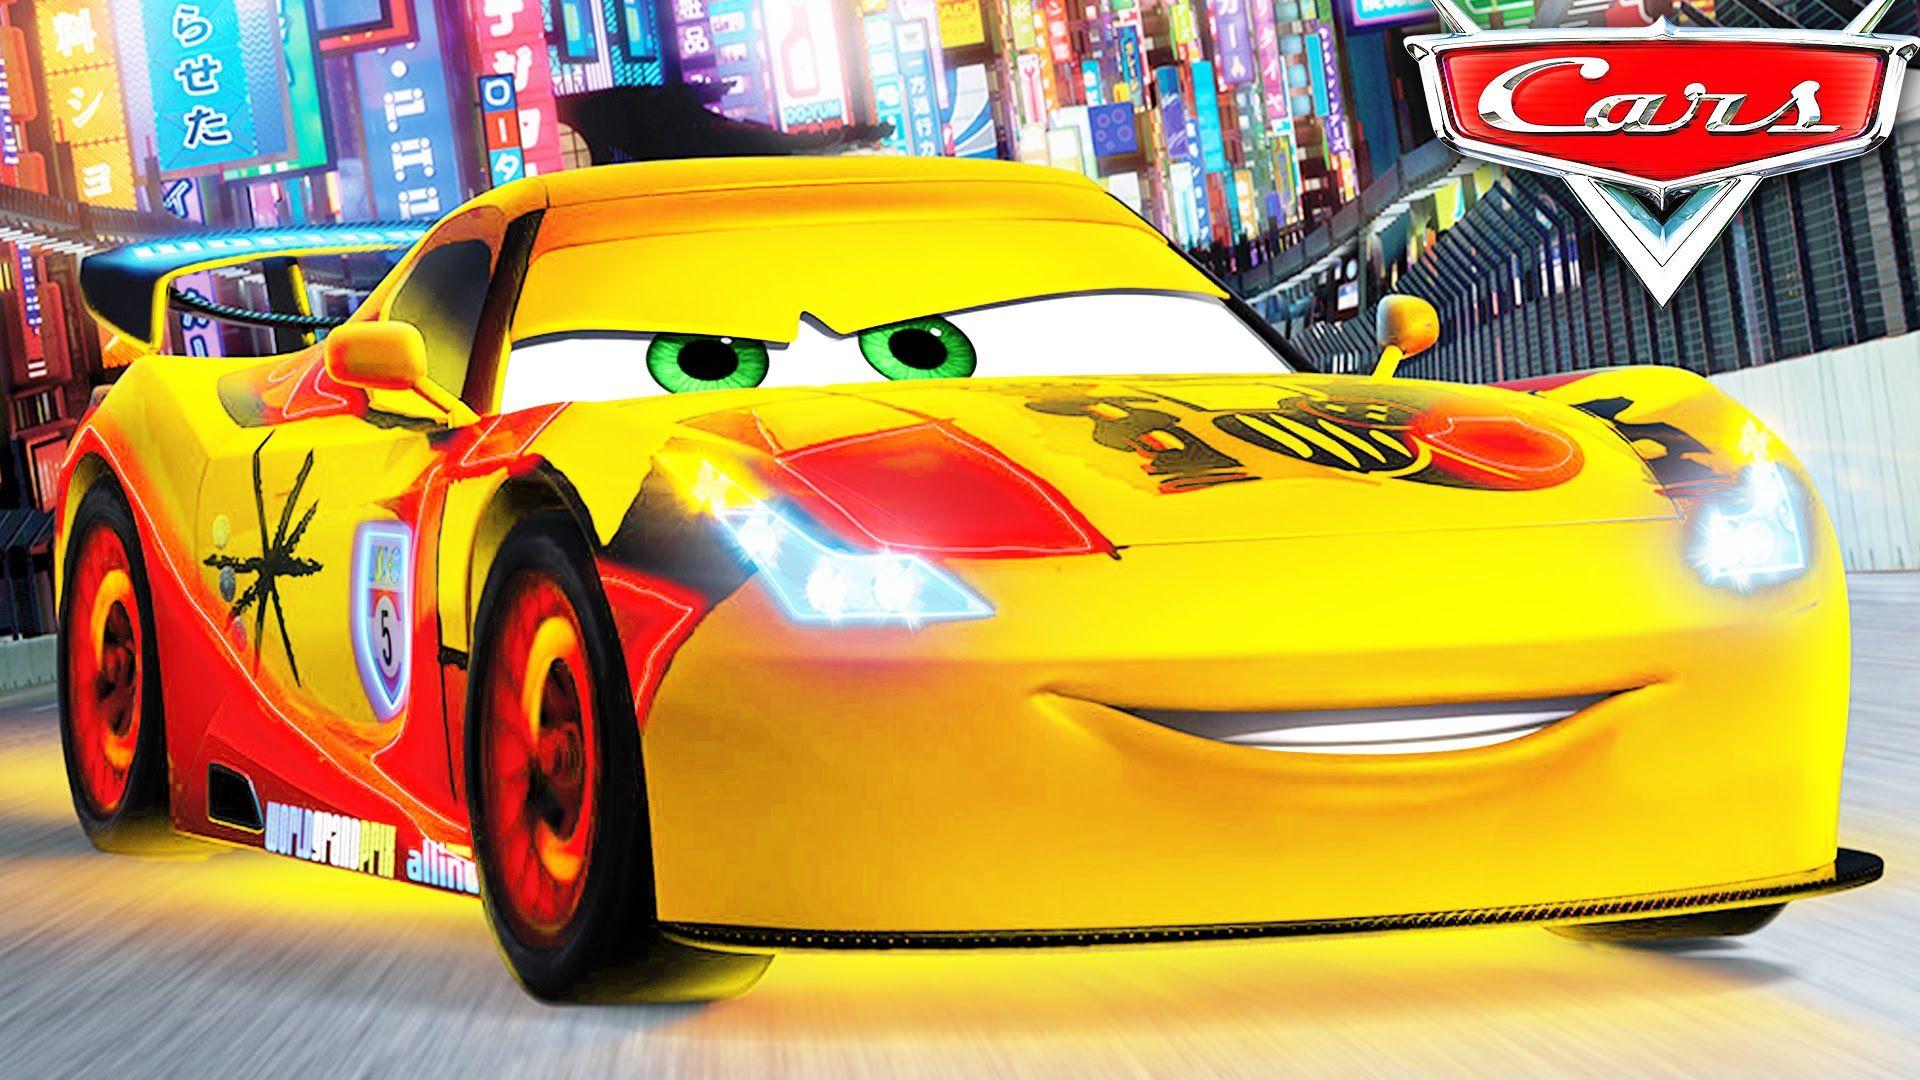 CARS 2 HD, Lightning MCQUEEN Miguel Tomino with Disney Pixar CARS